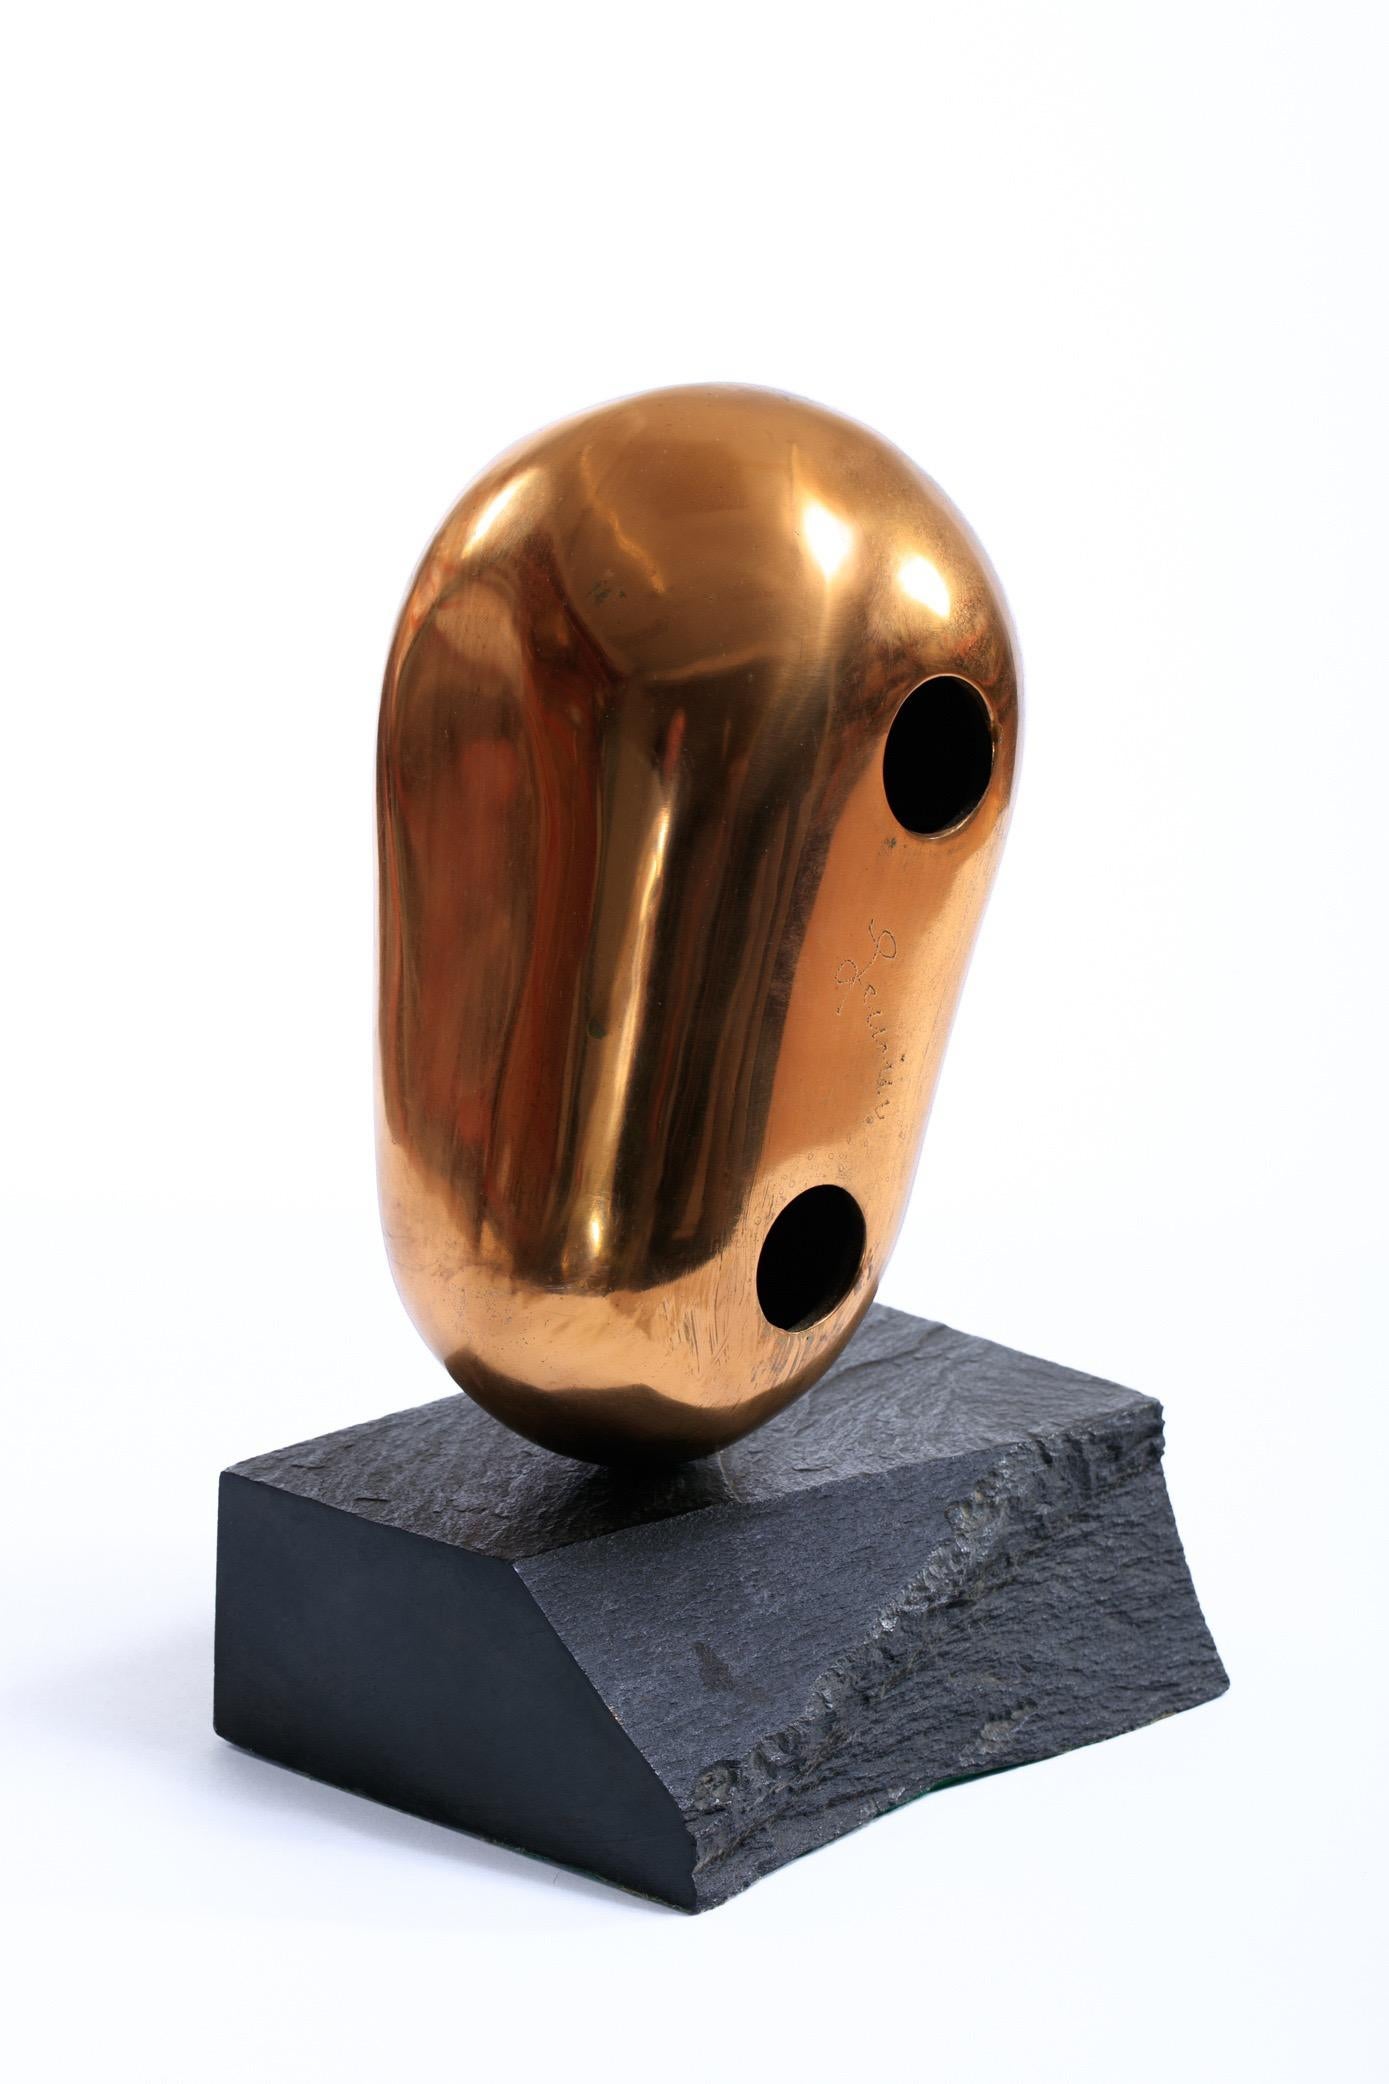 Abstract Gold /  Brass head sculpture on black marble base, signed on face of sculpture 